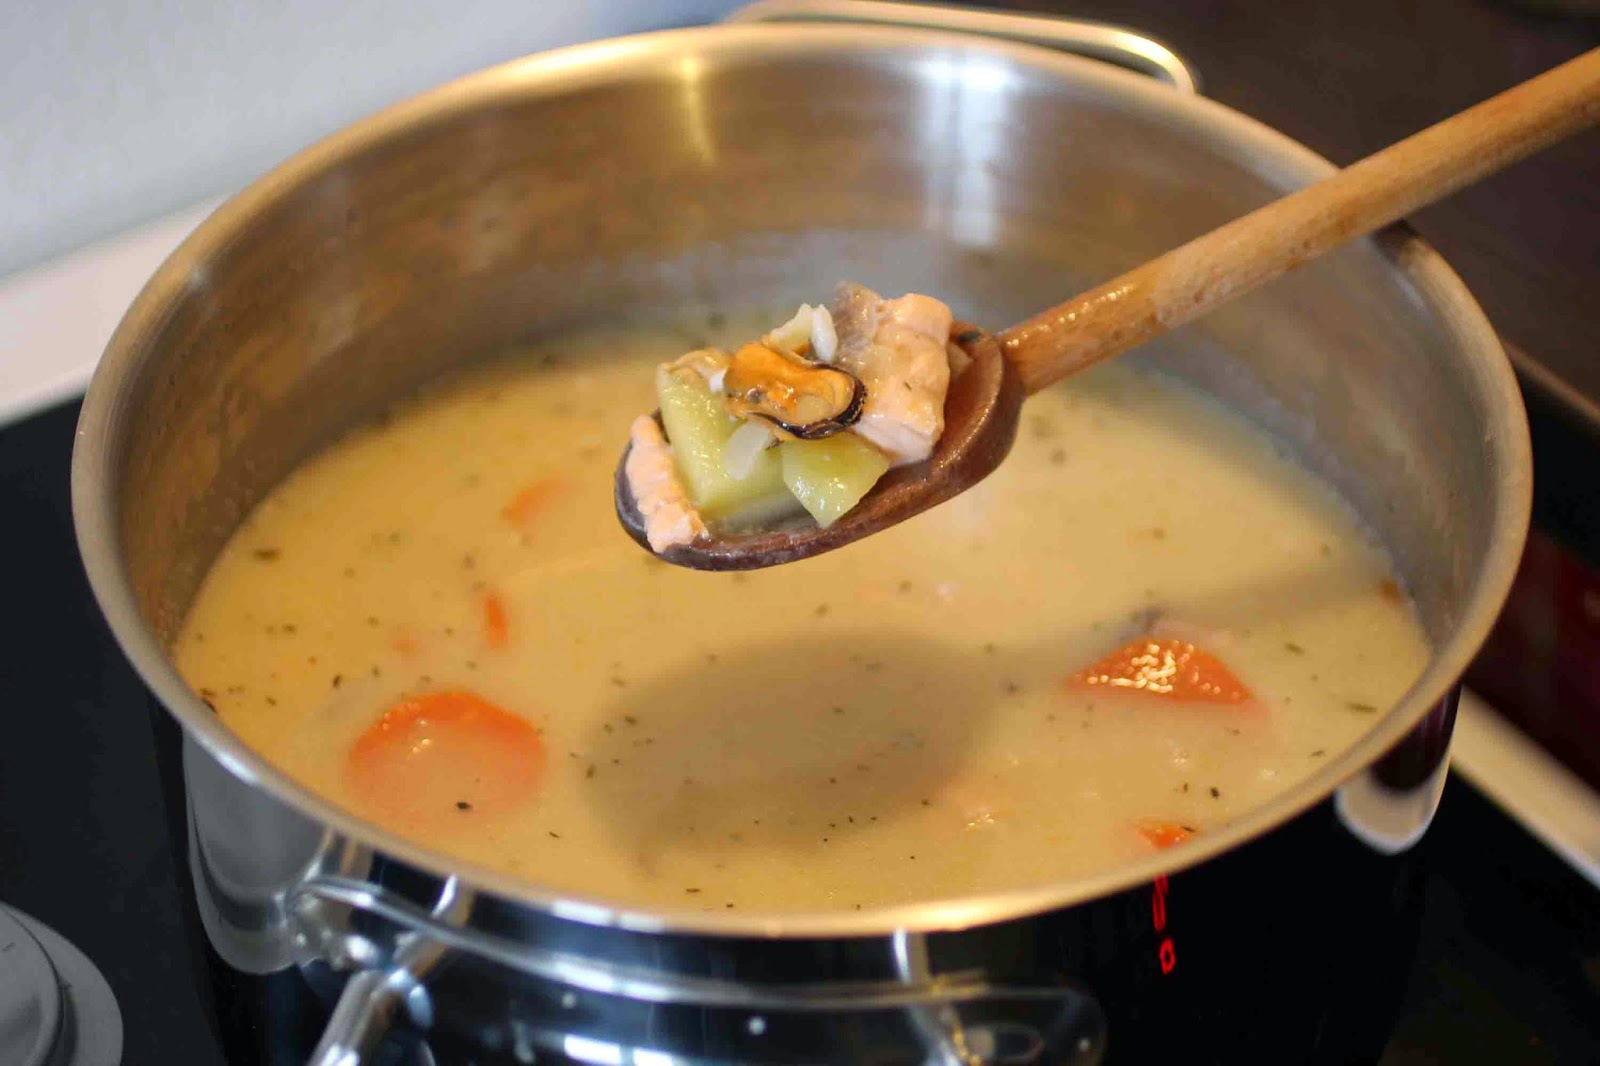 http://camilleenchocolat.blogspot.fr/2015/04/seafood-chowder.html